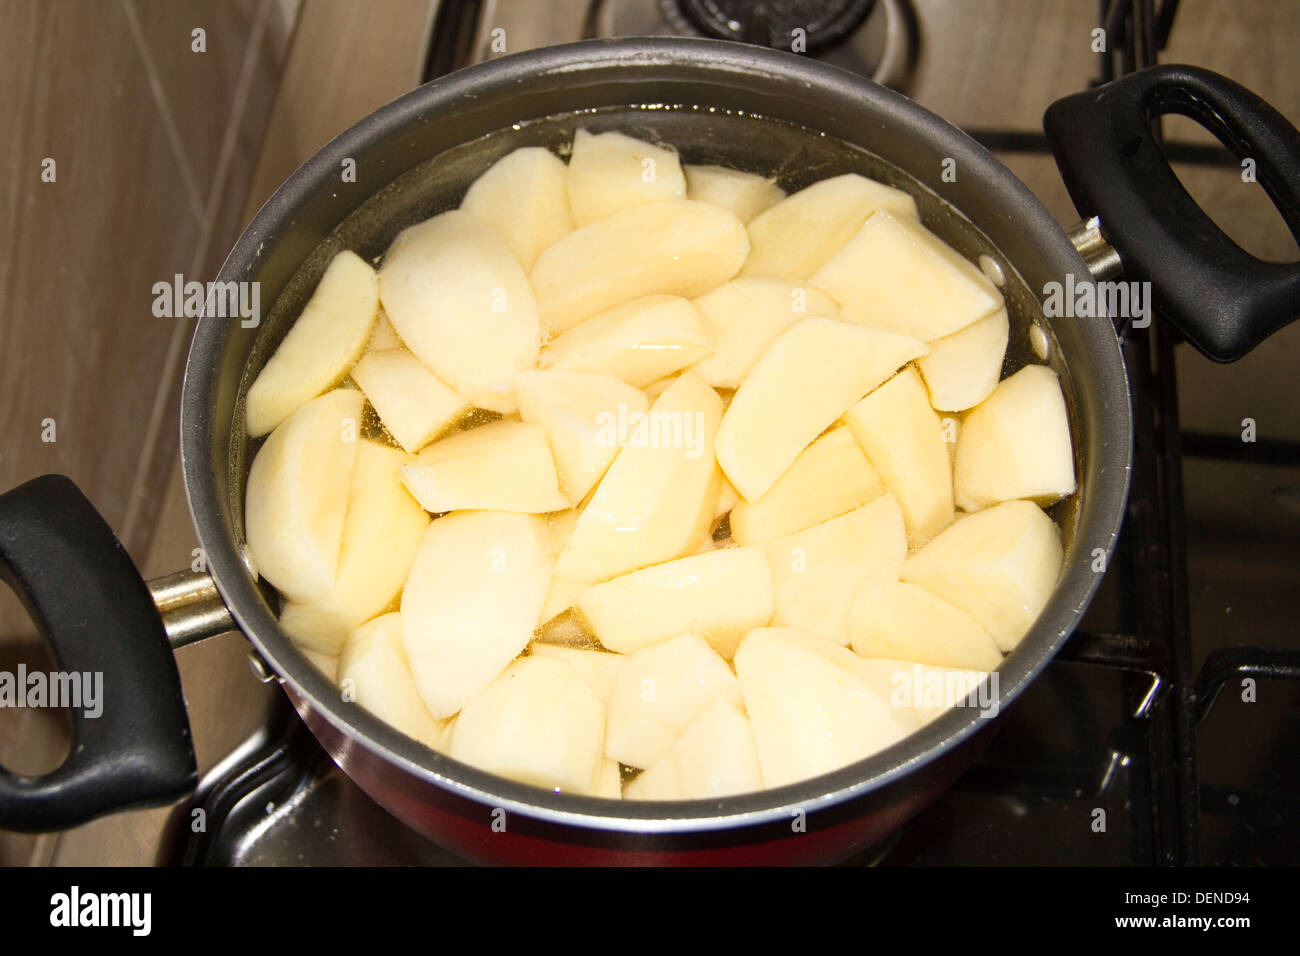 Cooking Potatoes in Cooking Pot Stock Photo